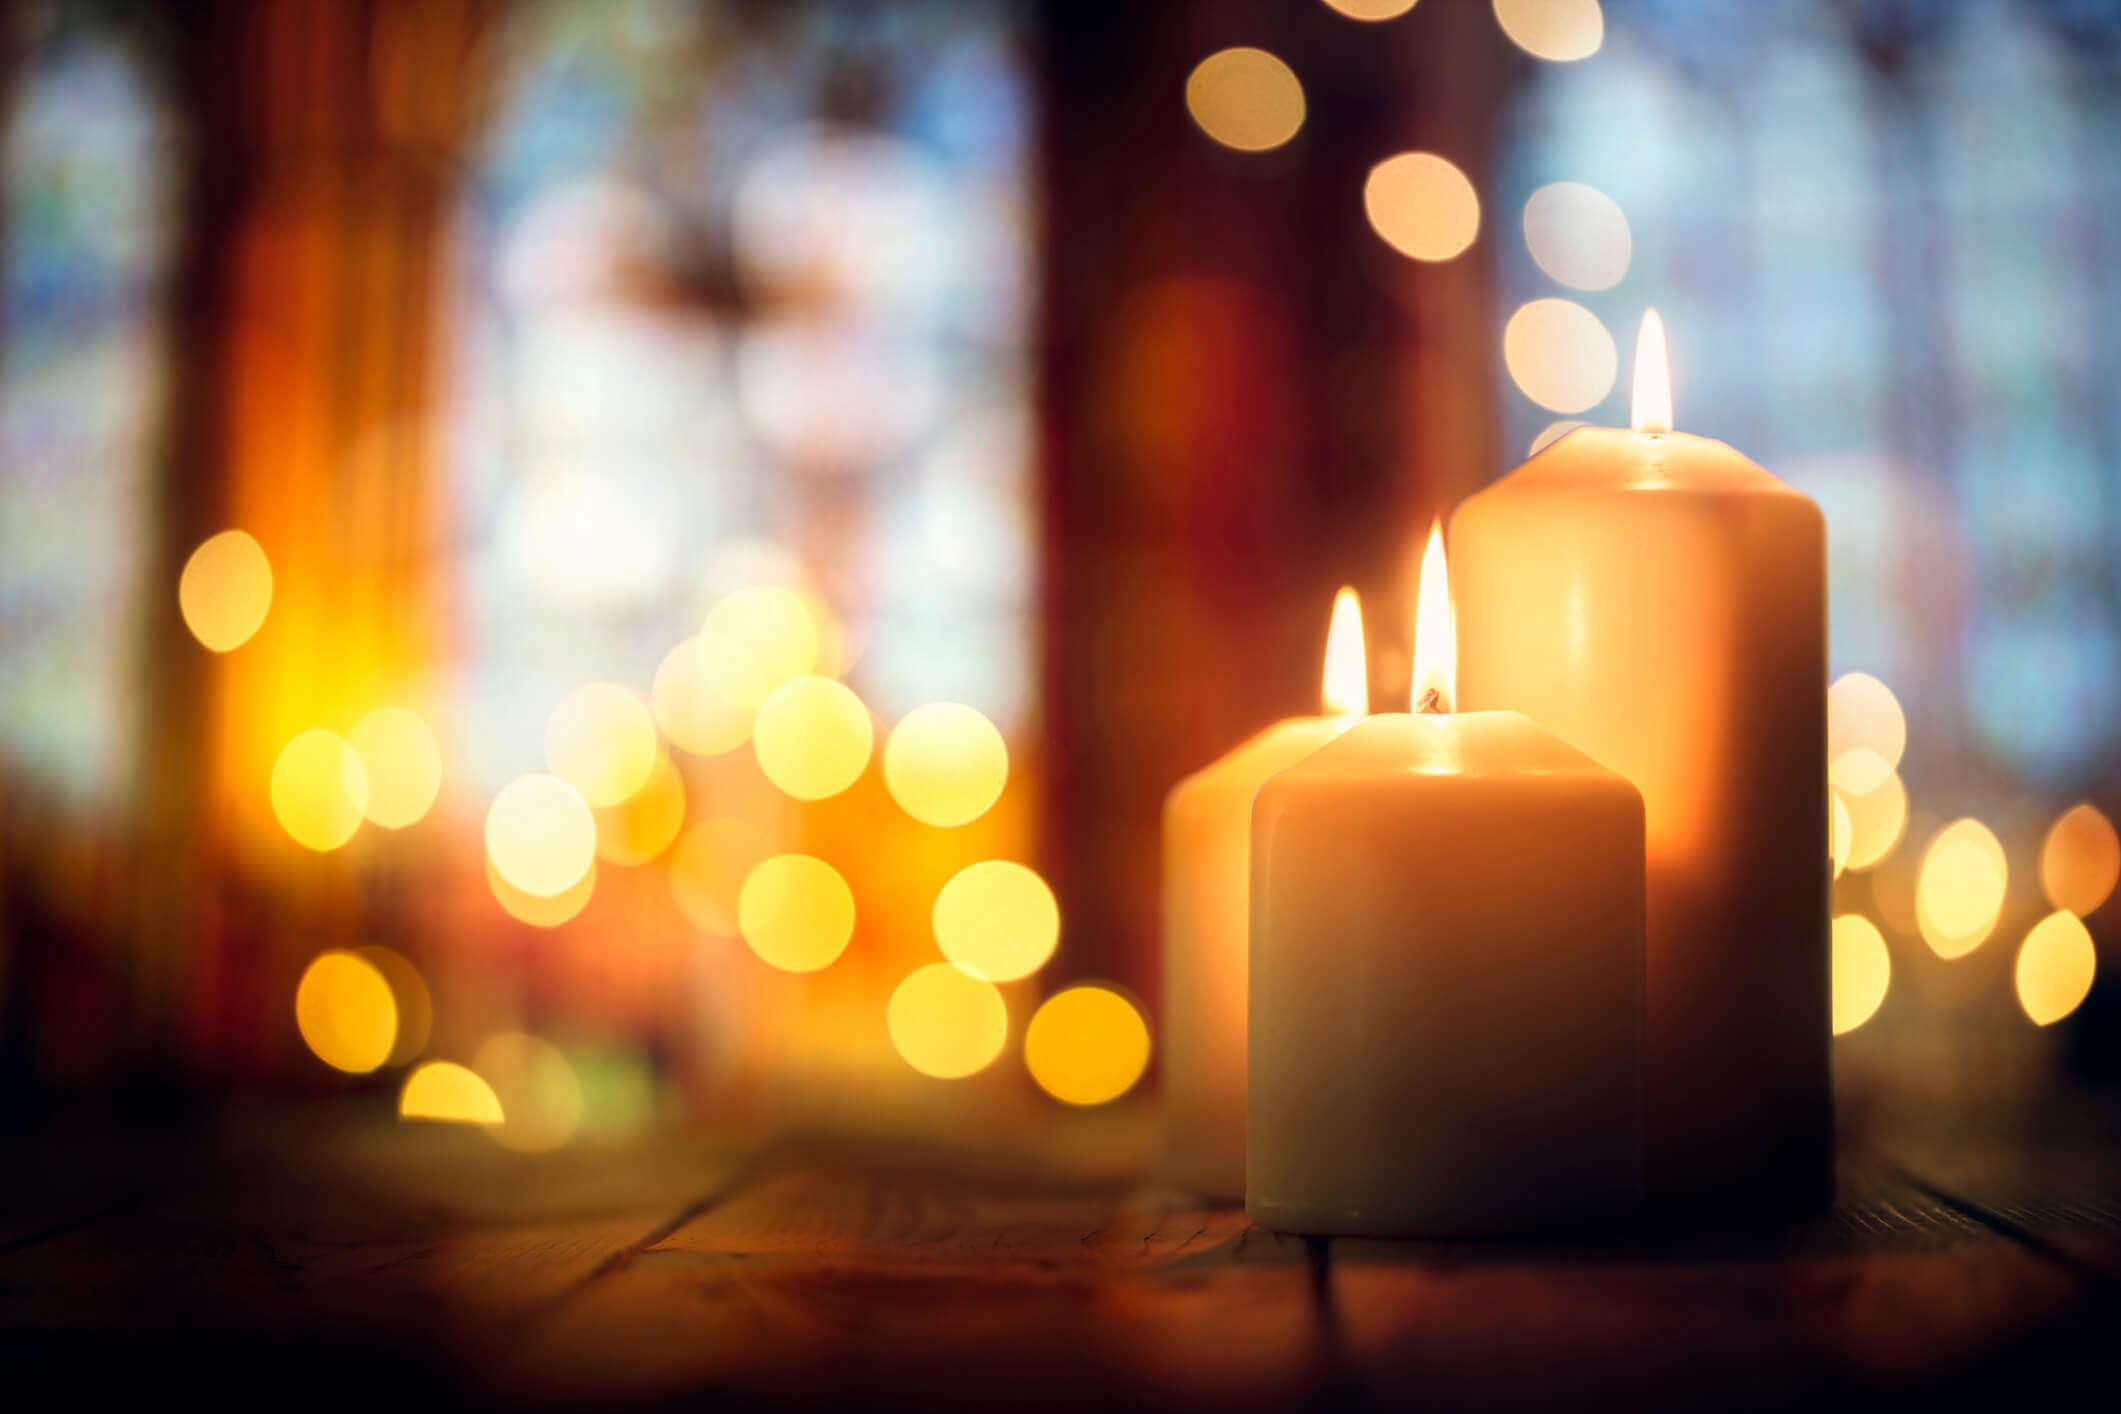 two pillar candles lit  in the foreground with candle lighting glowing in the background